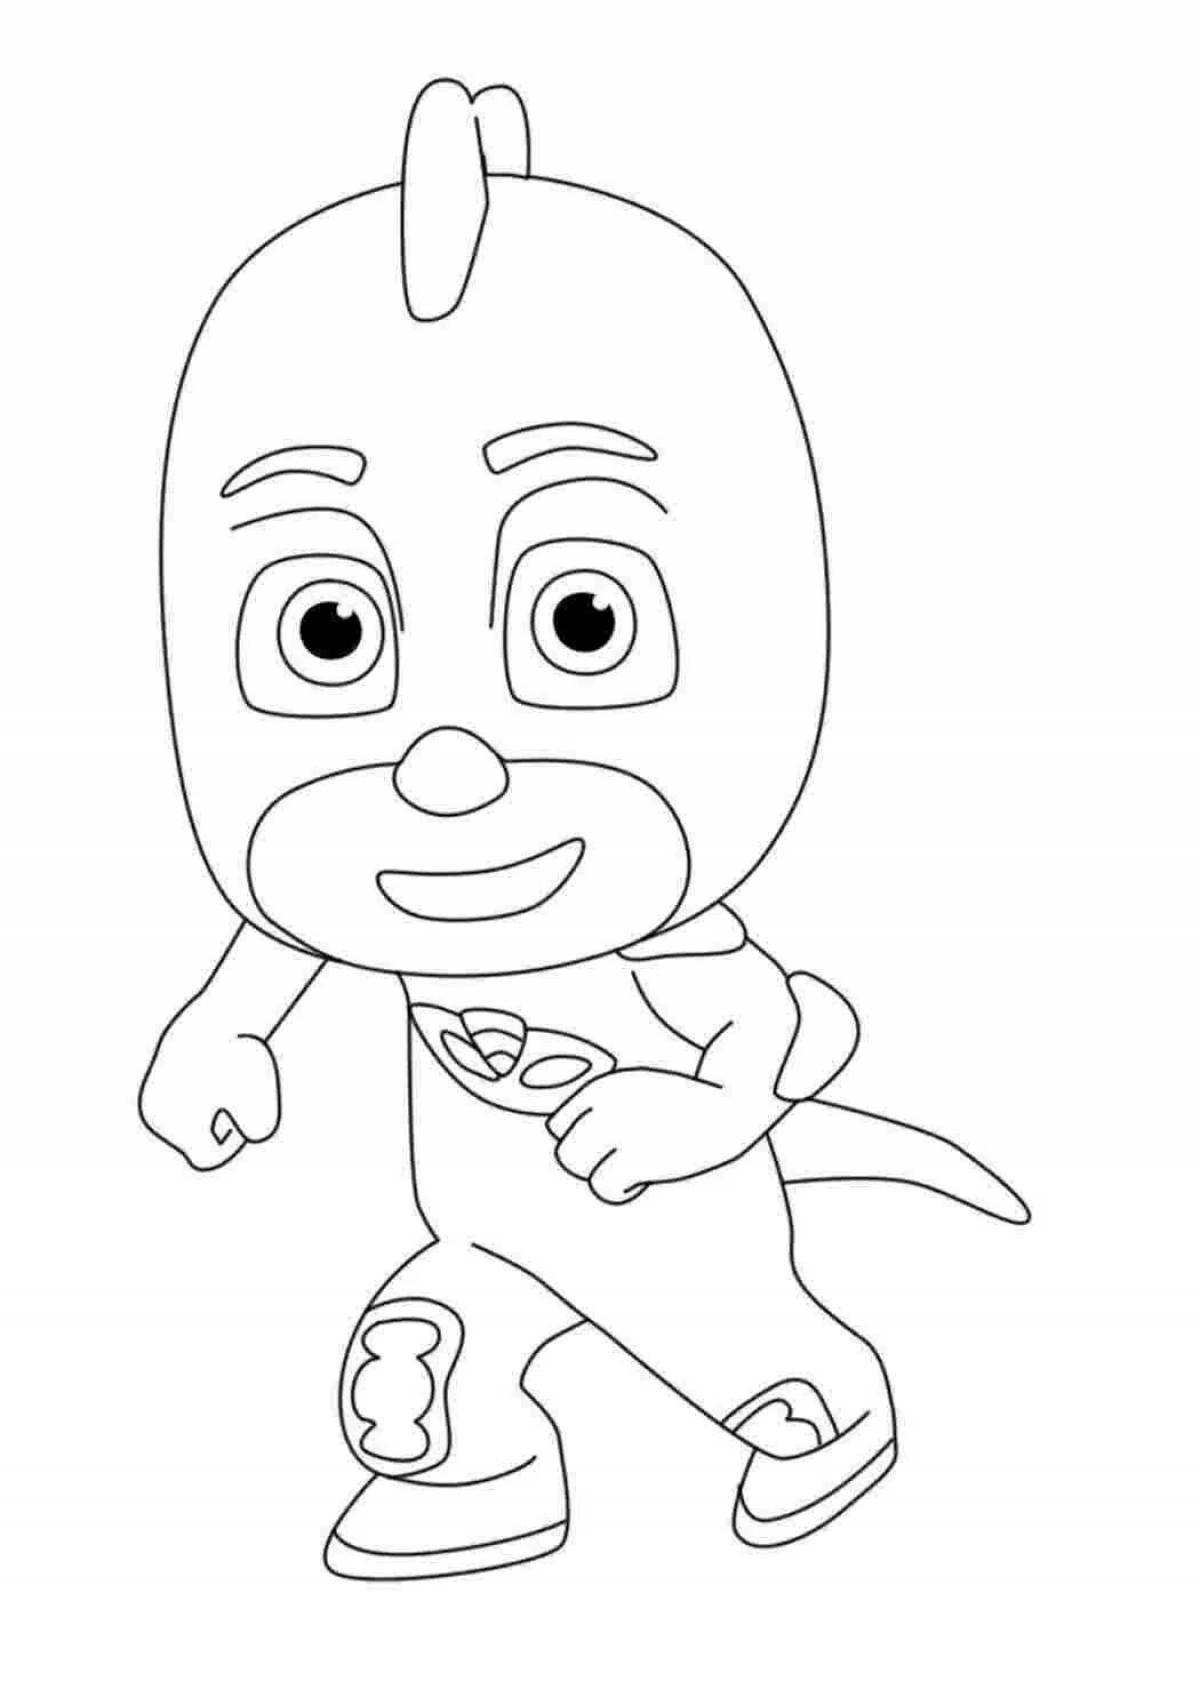 Adorable gecko coloring page